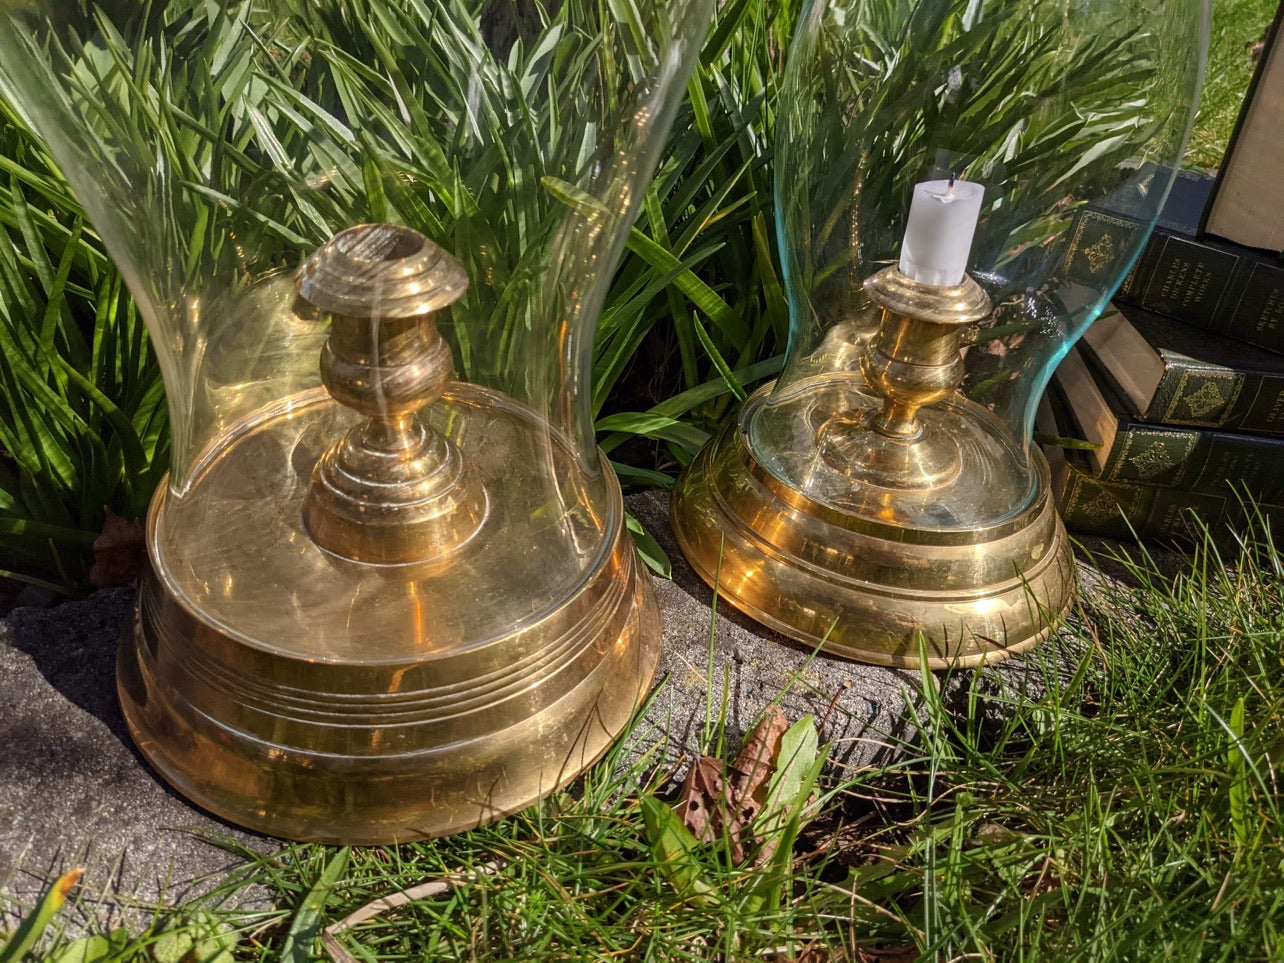 The Brass Candle Lanterns